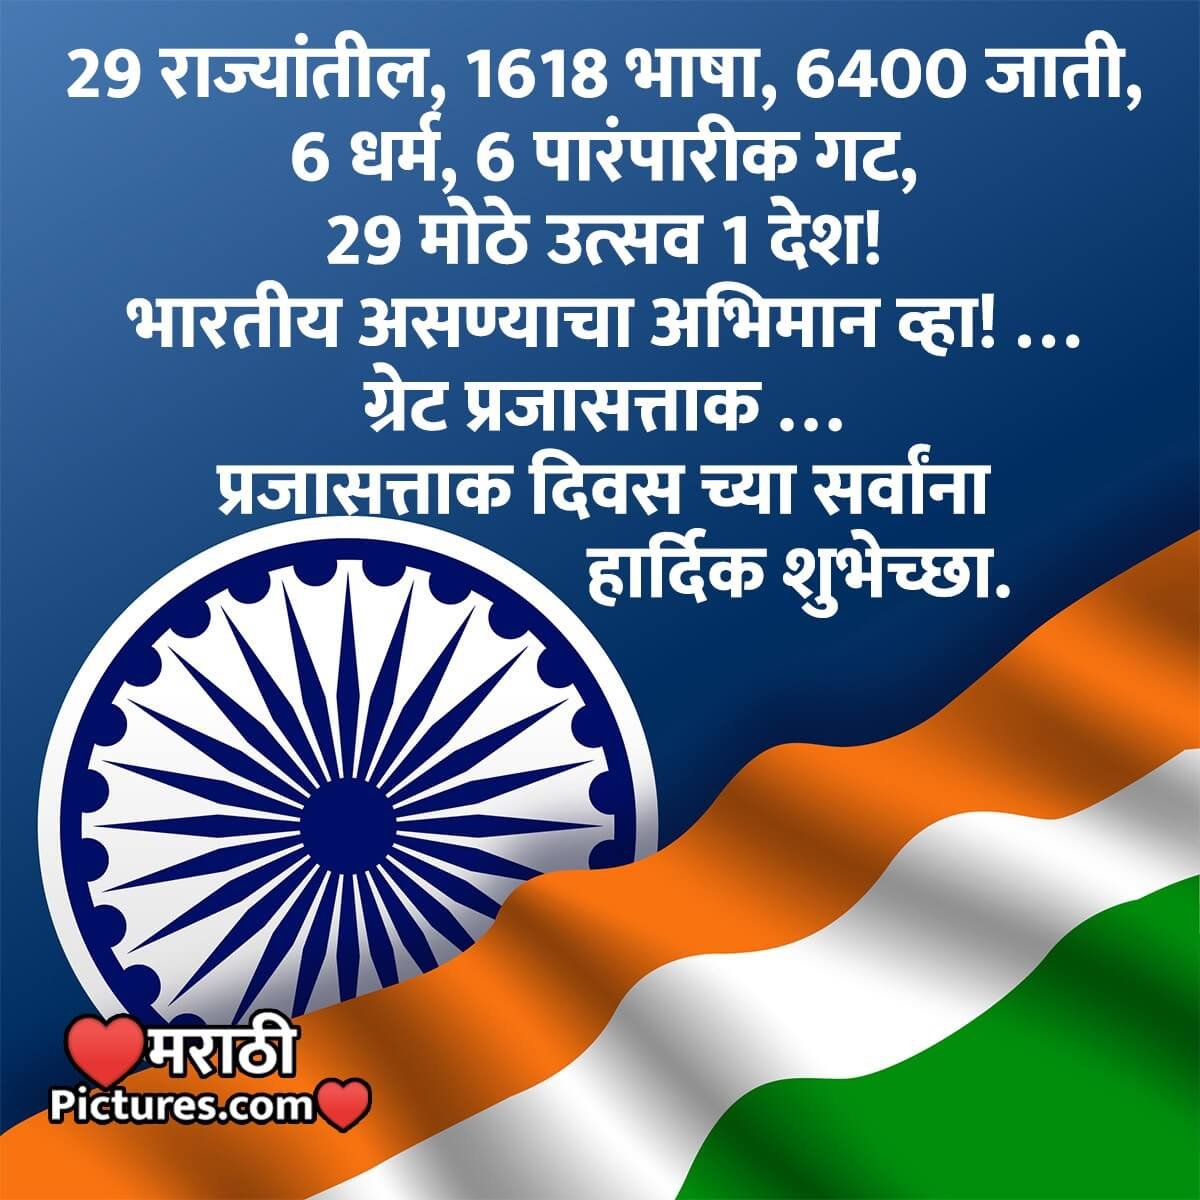 Republic Day Messages In Marathi